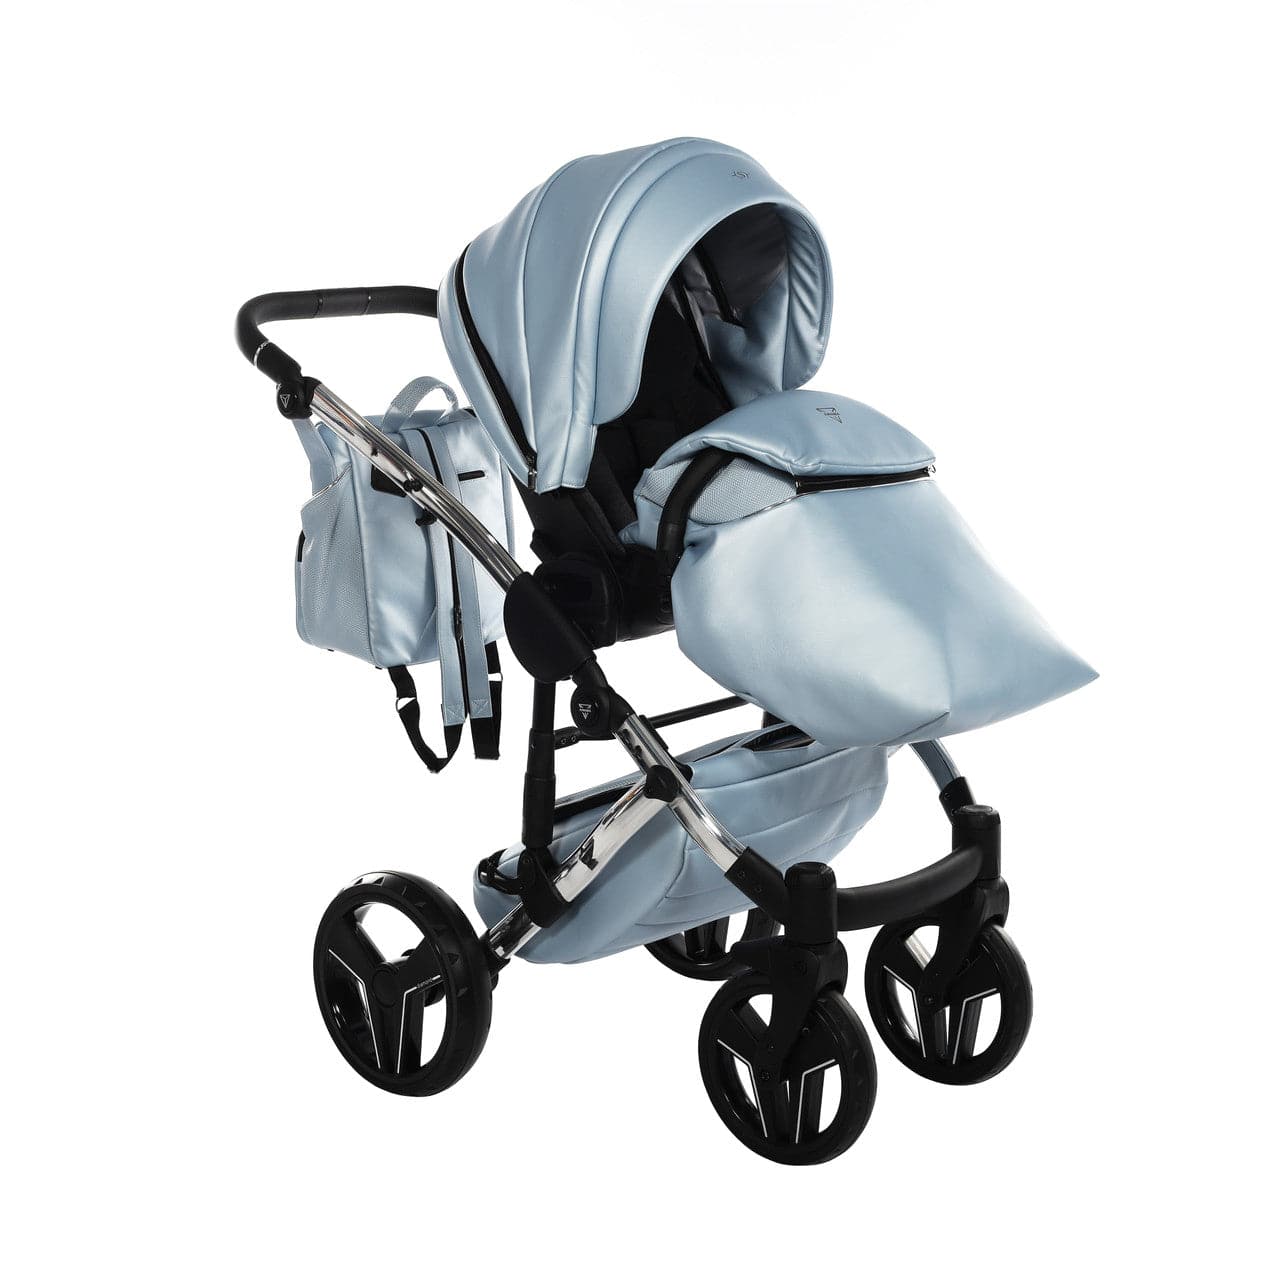 Junama S-Class 2 In 1 Pram - Sky Blue - For Your Little One